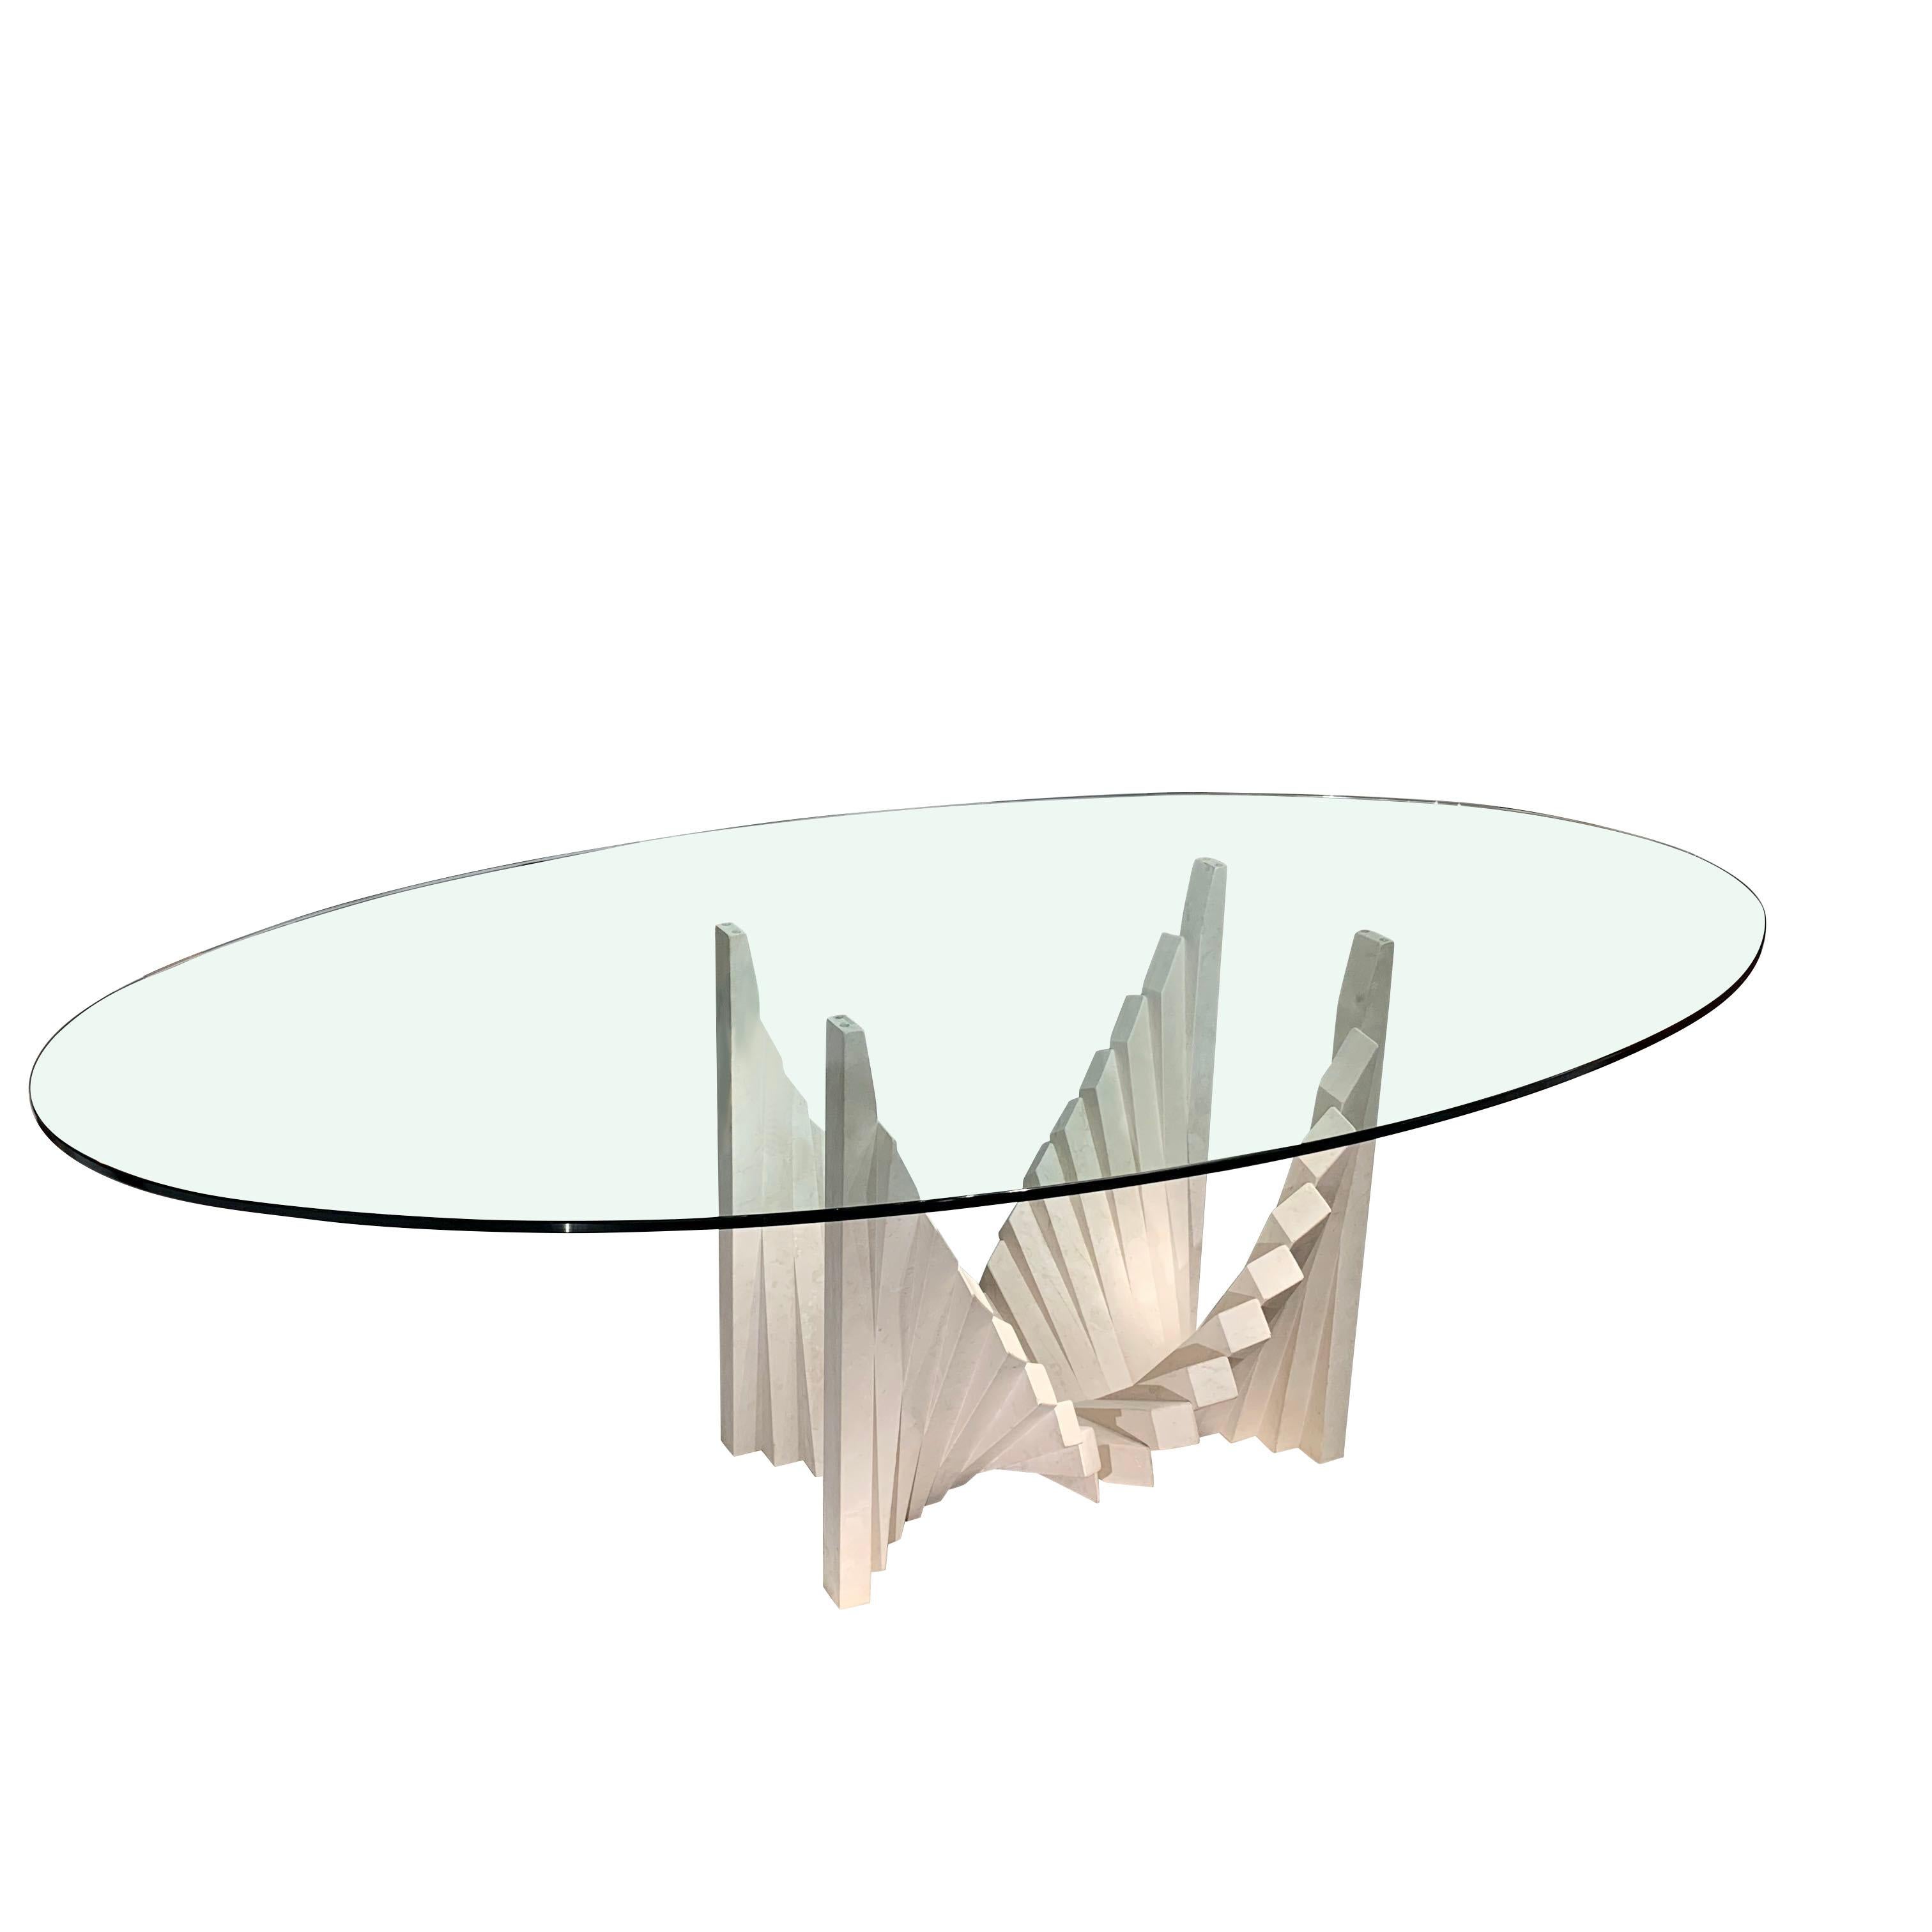 Late 20th Century Travertine Accordian Shape Design Base Glass Top Dining Table, France, 1970s